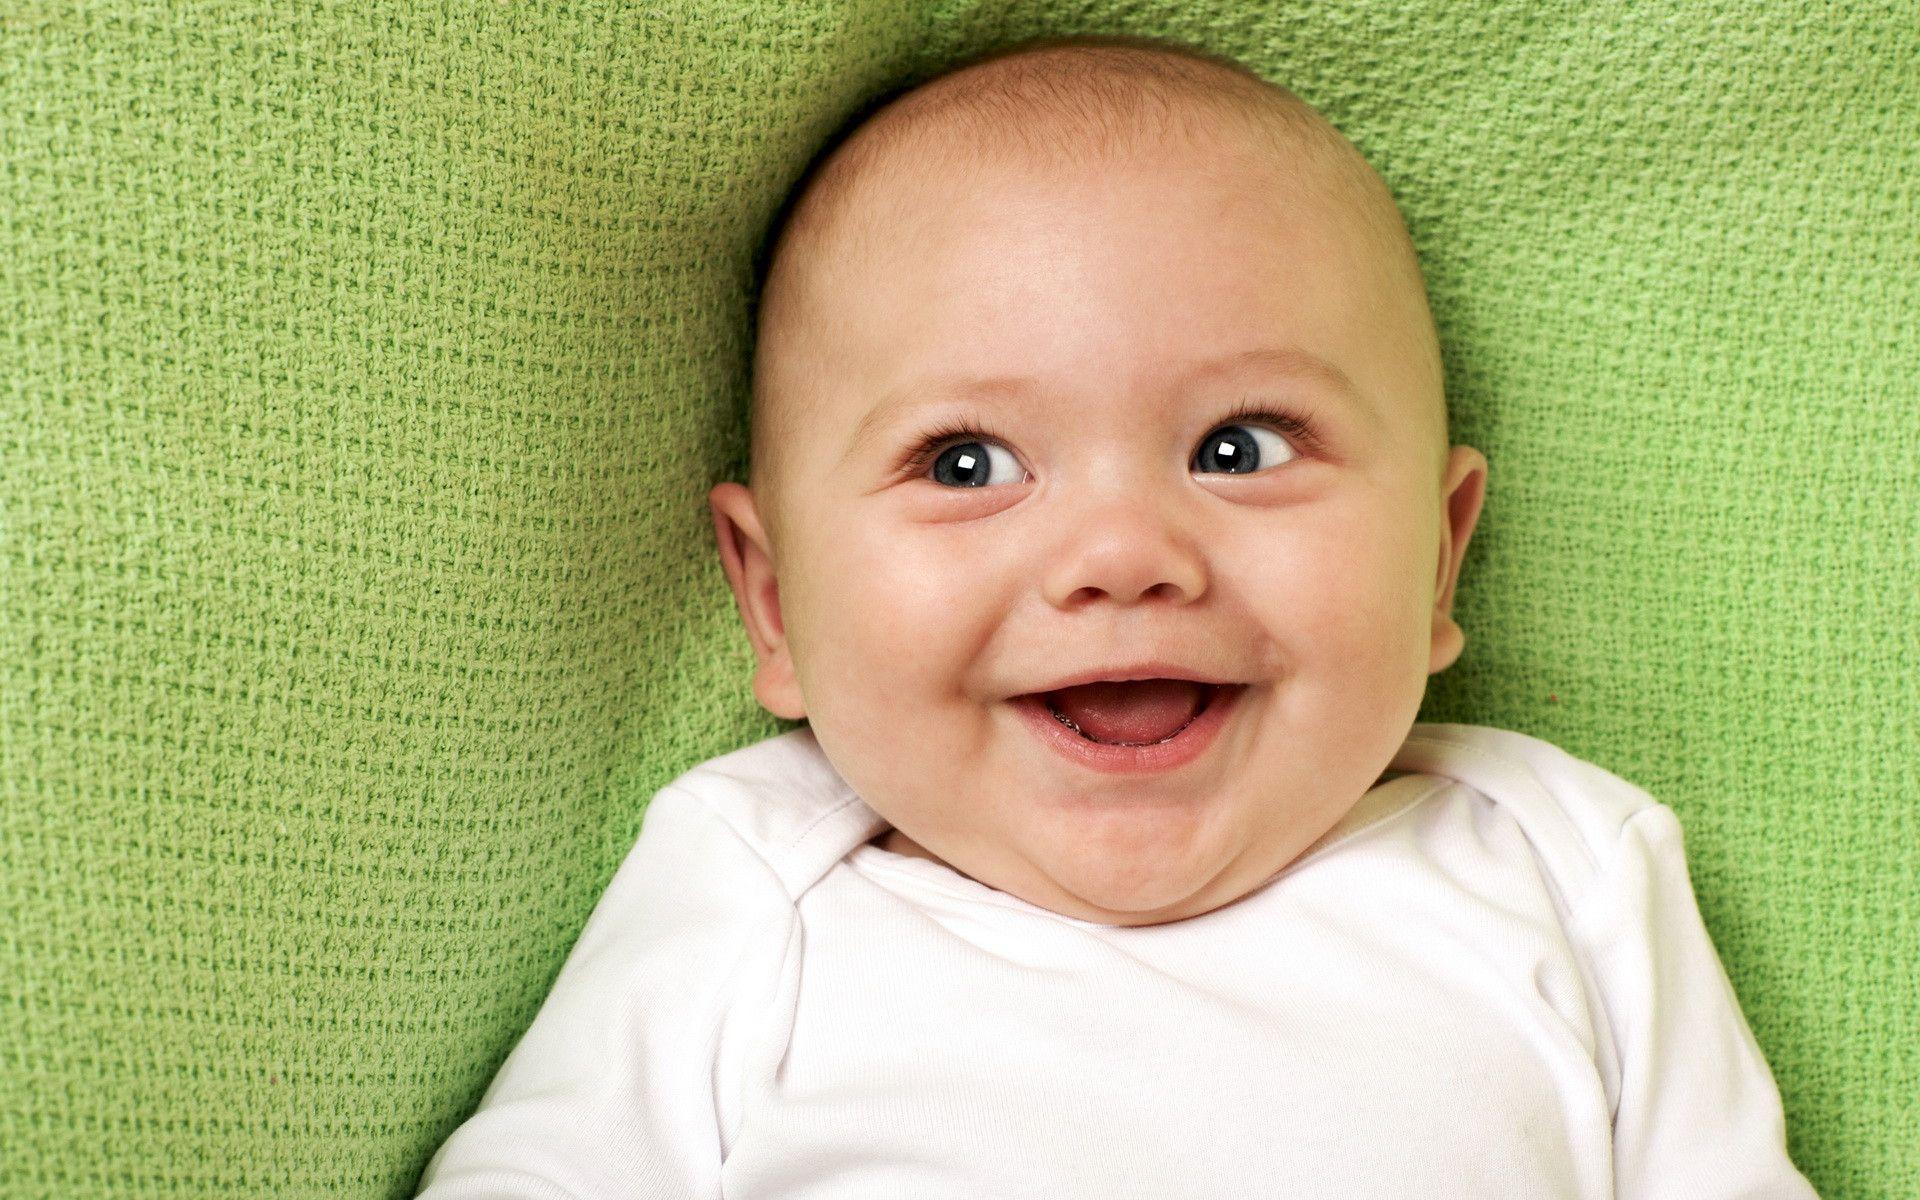 Free Wallpaper HD 1080p Funny Baby Laughing Wallpaper. woliper